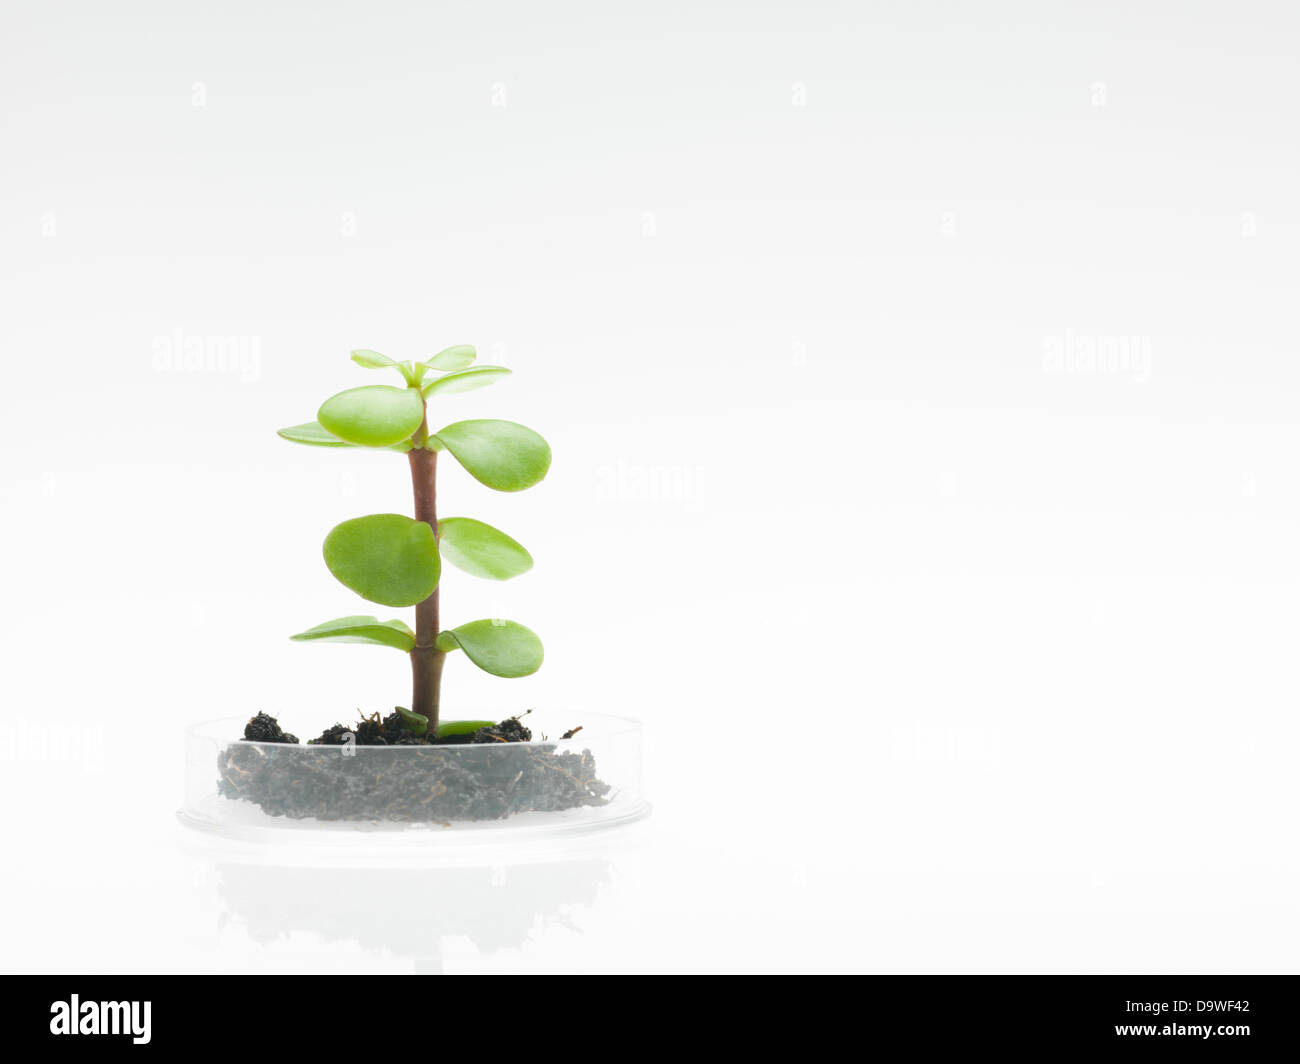 side view of petri dish with a small sprout of a leafy plant emerging from a clump of dirt, against a white background Stock Photo